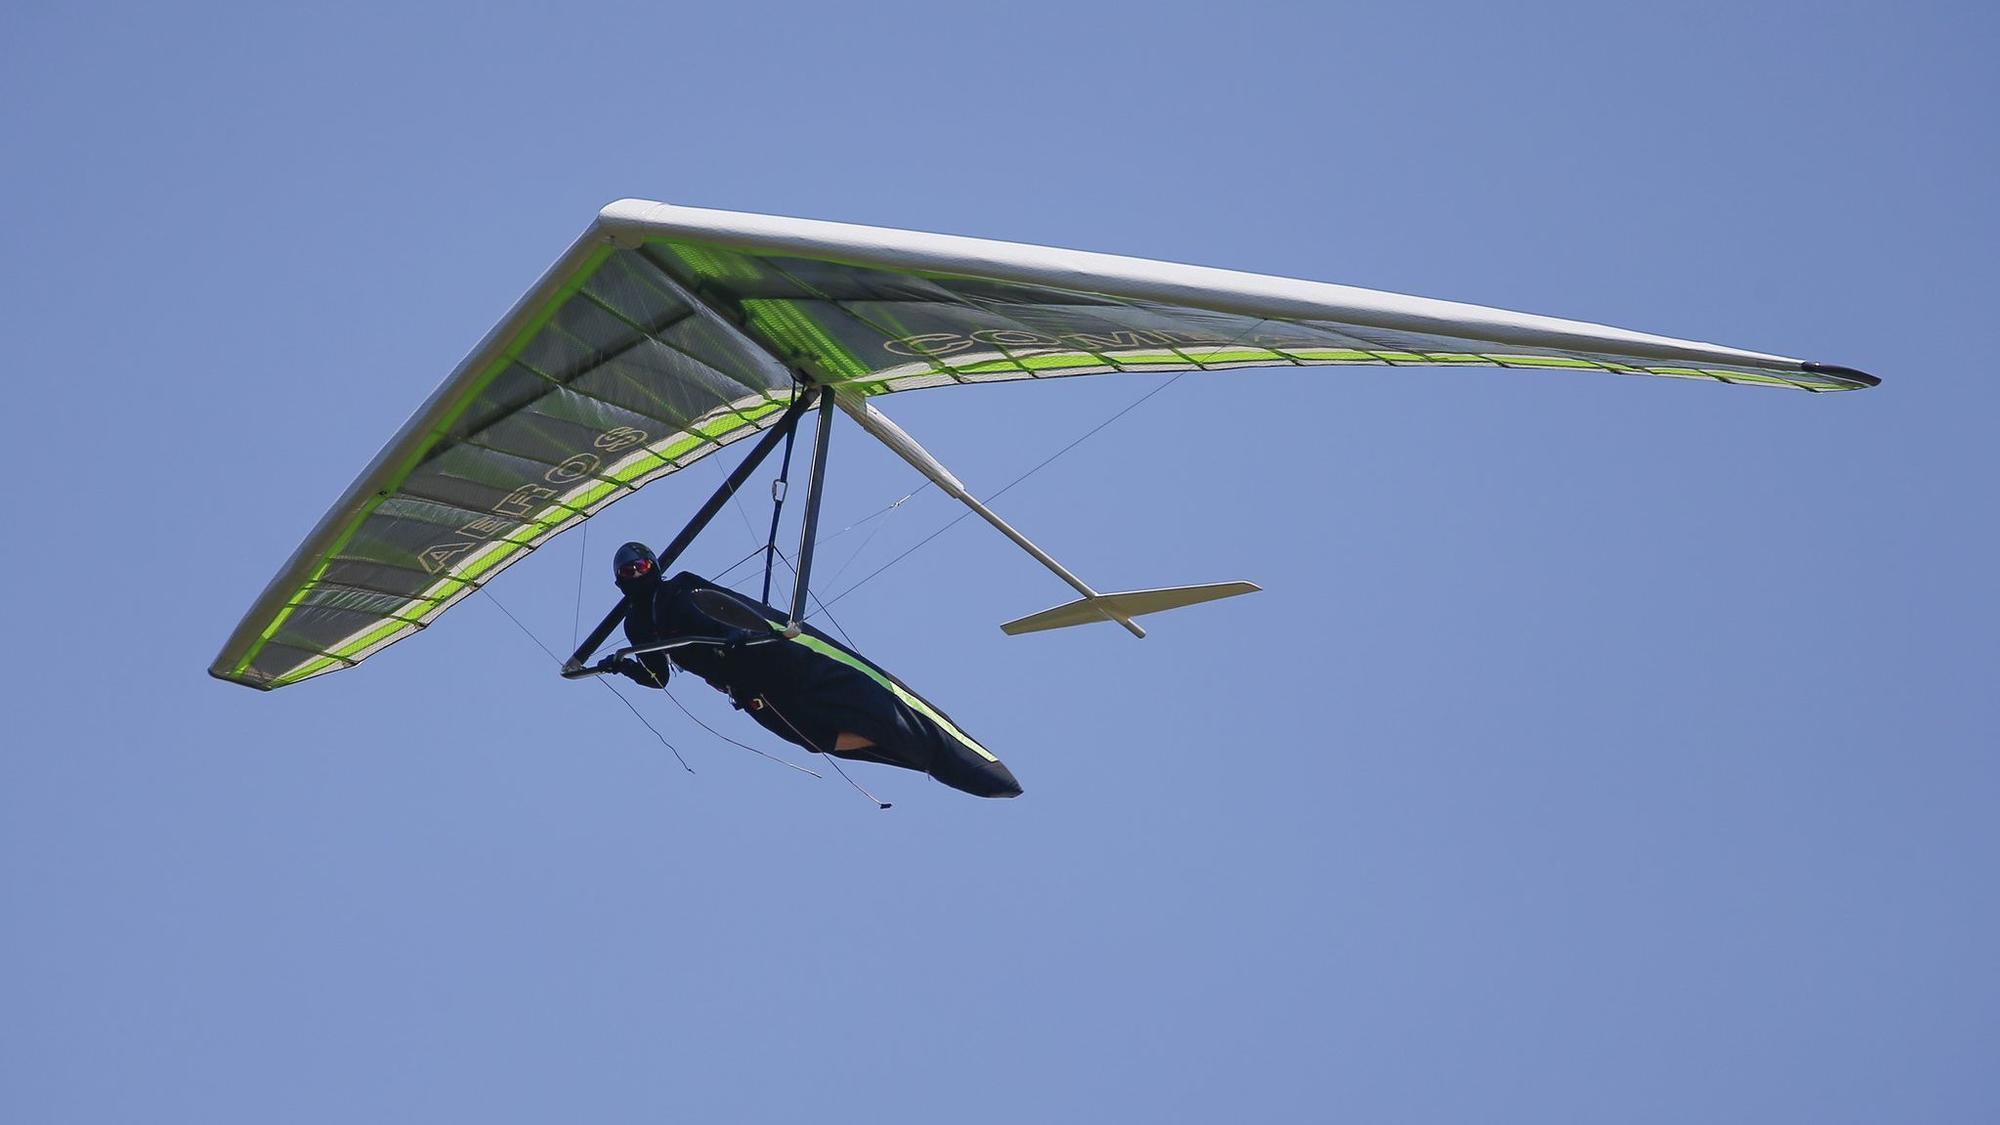 World class hang gliders soar over south Lake County 'I love being in